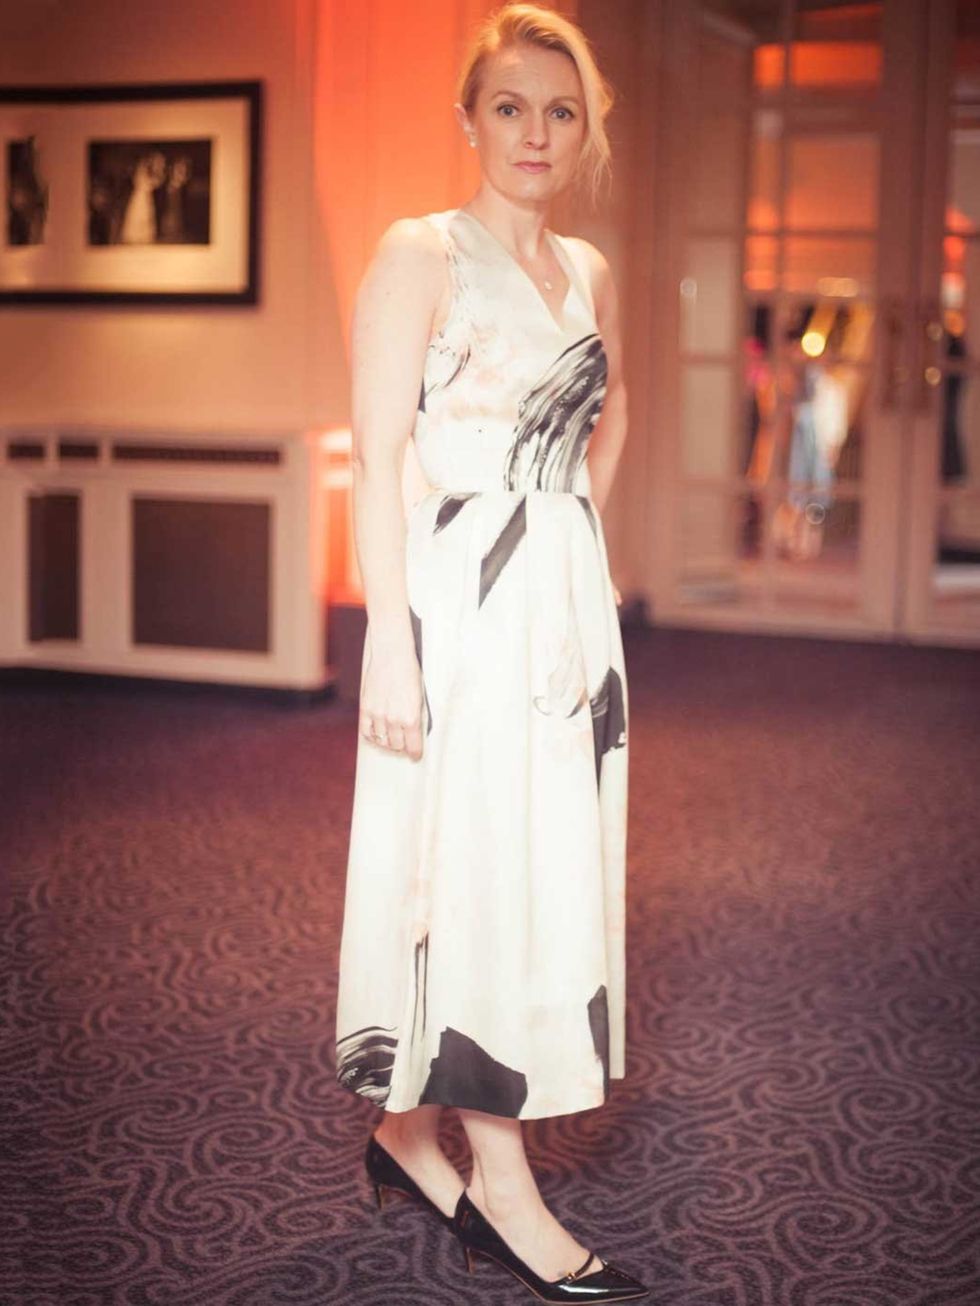 <p>Lorraine Candy - Editor-In-ChiefChristopher Kane dress, Rupert Sanderson shoes, Christian Louboutin clutch.</p>